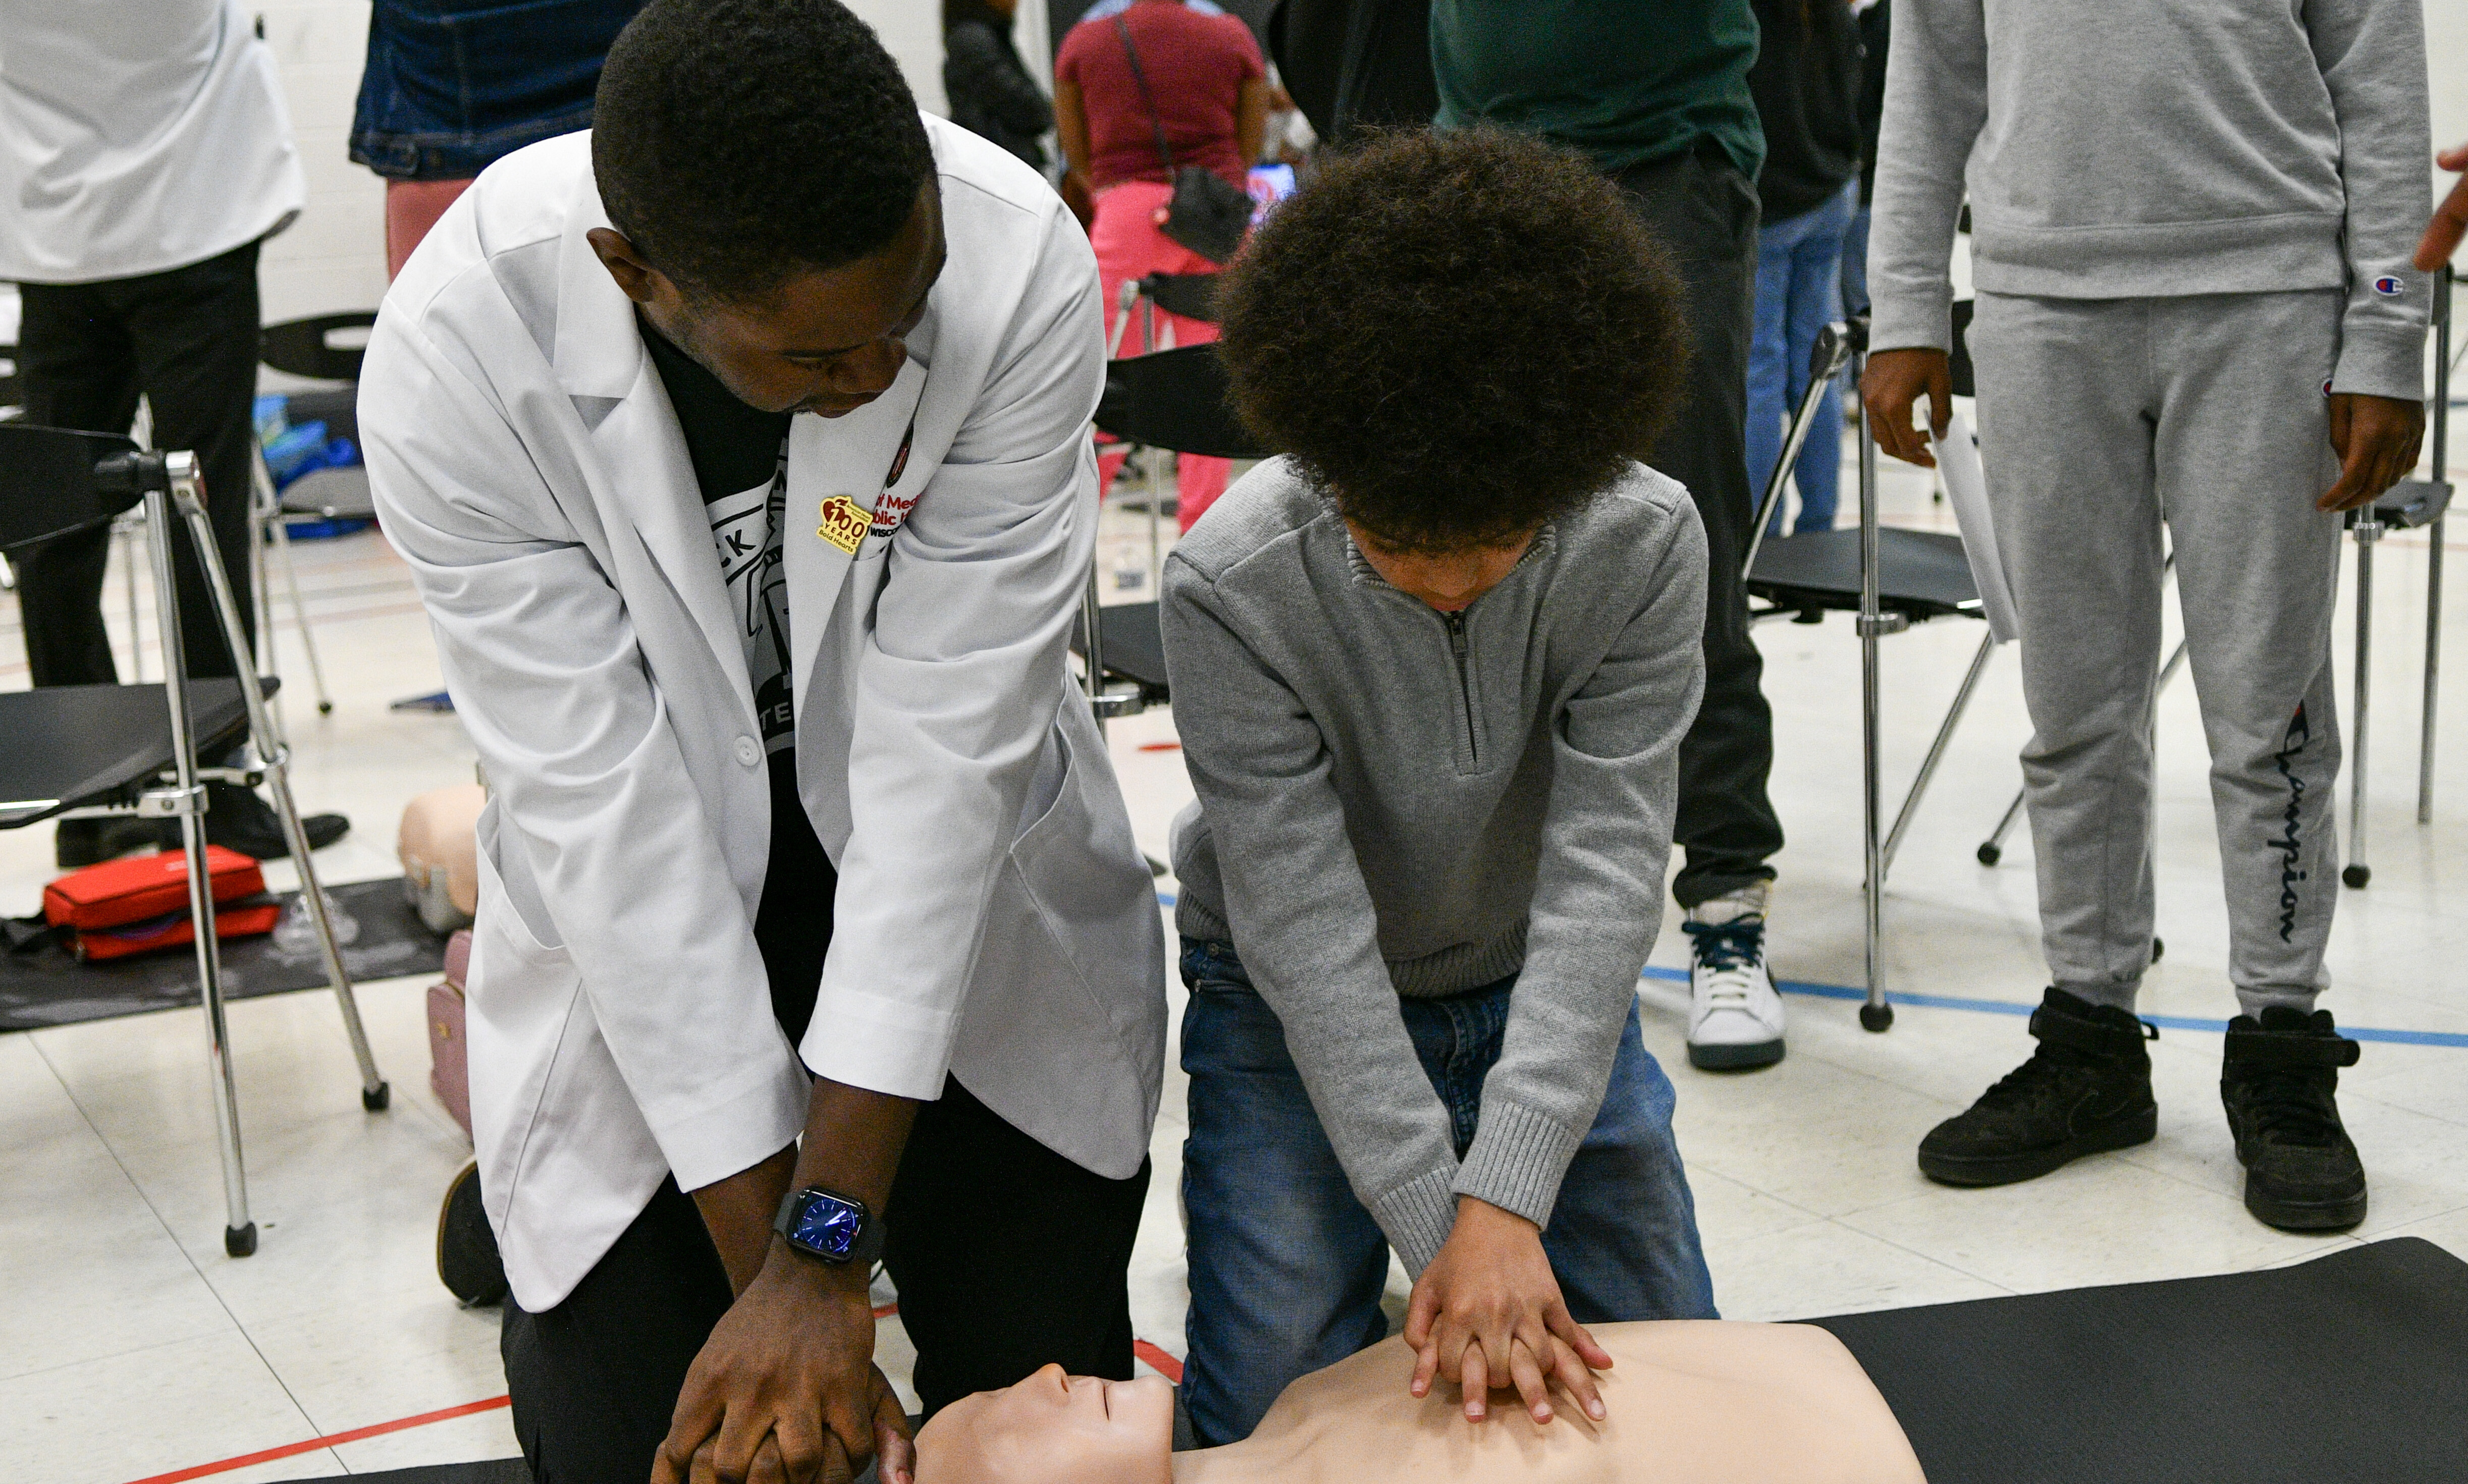 A medical professional demonstrates chest compressions for a student.